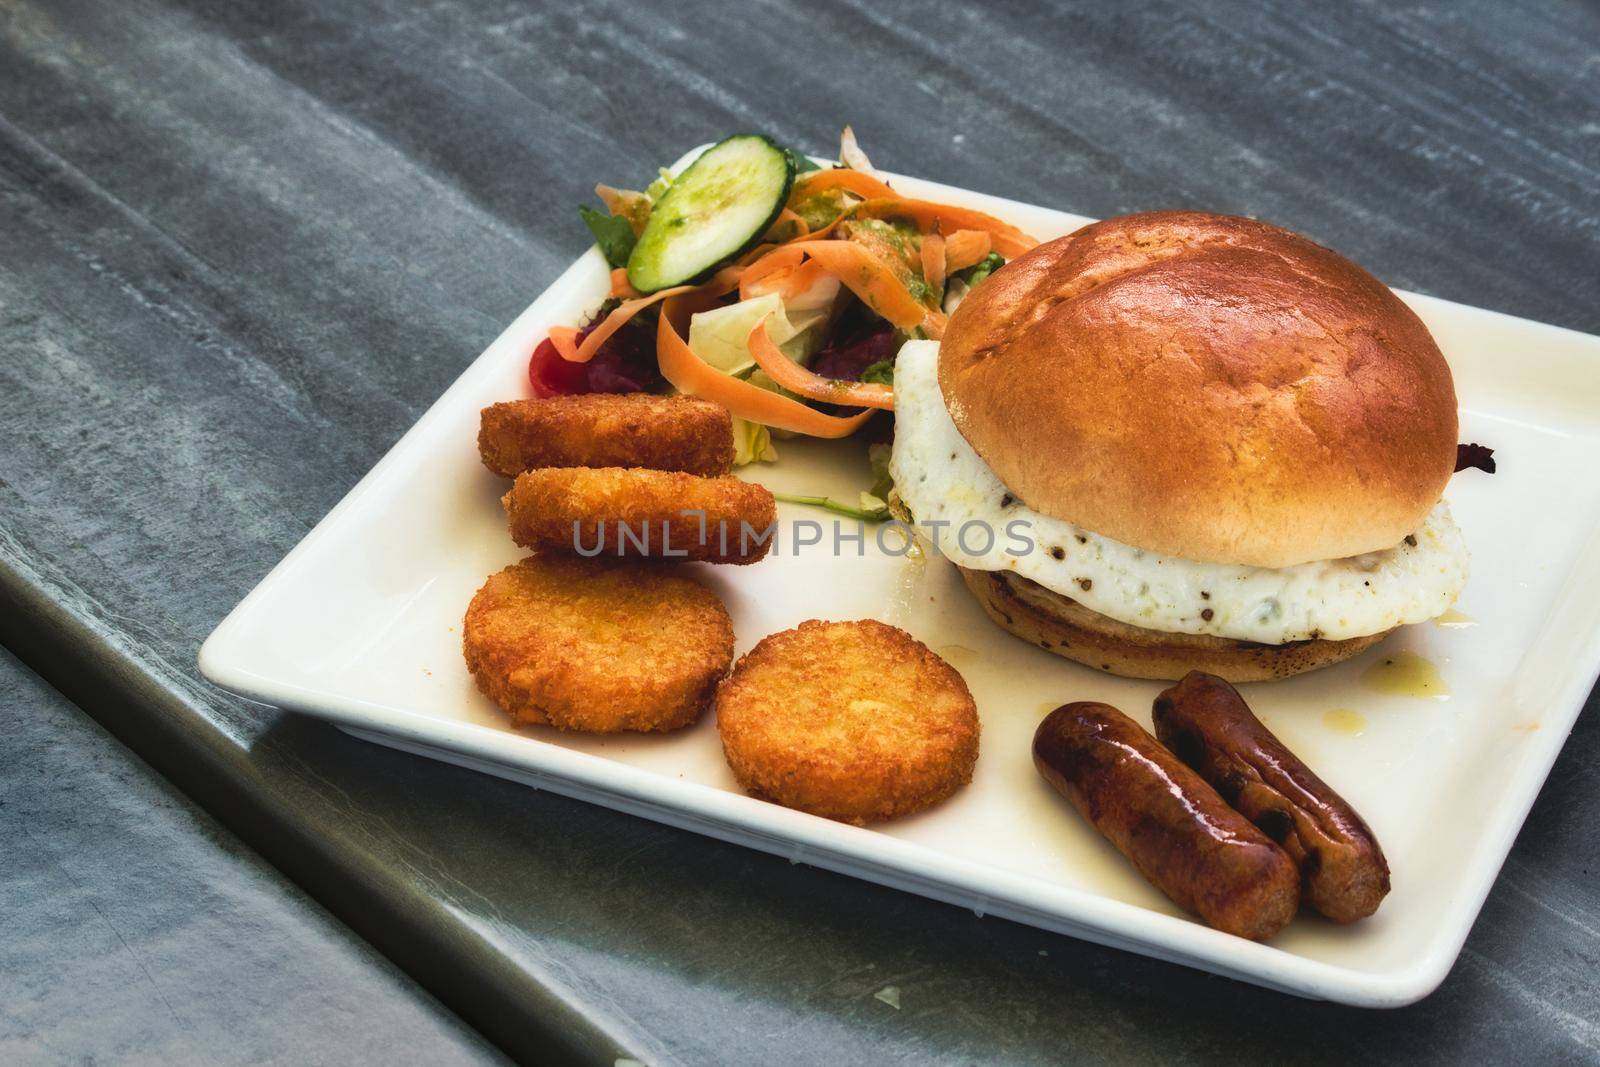 Breakfast brioche with fried egg, sausages, hash browns and salad by tennesseewitney